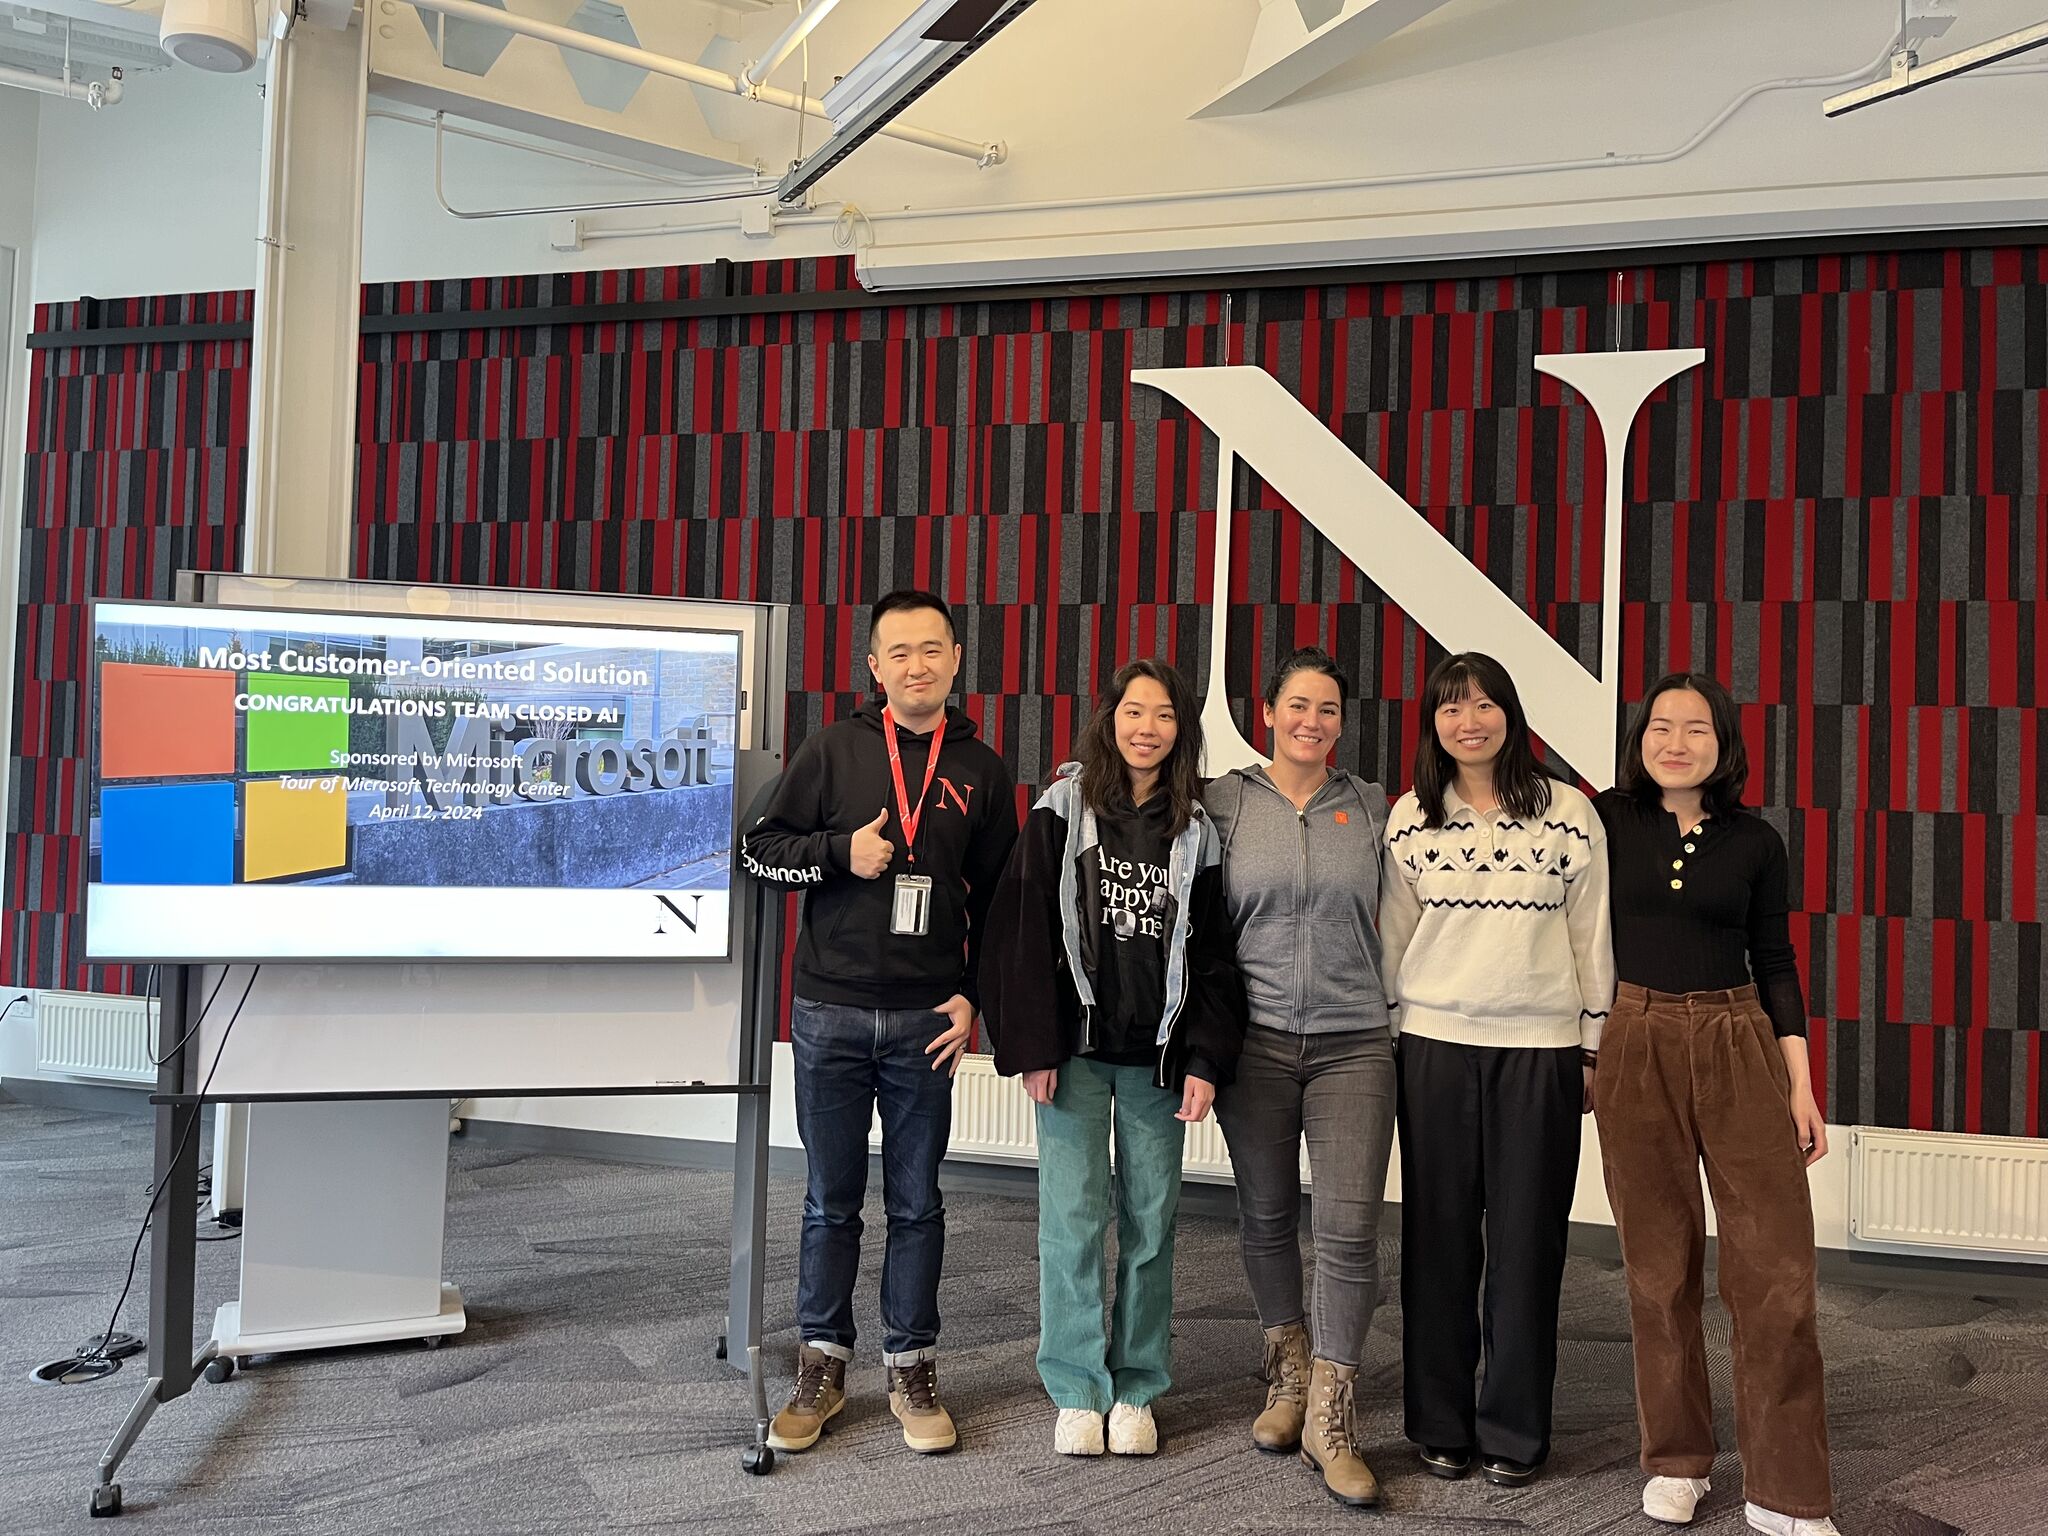 A group of five students smile next to a screen that says "Most Customer-Oriented Solution: Congratulations Team Closed AI"